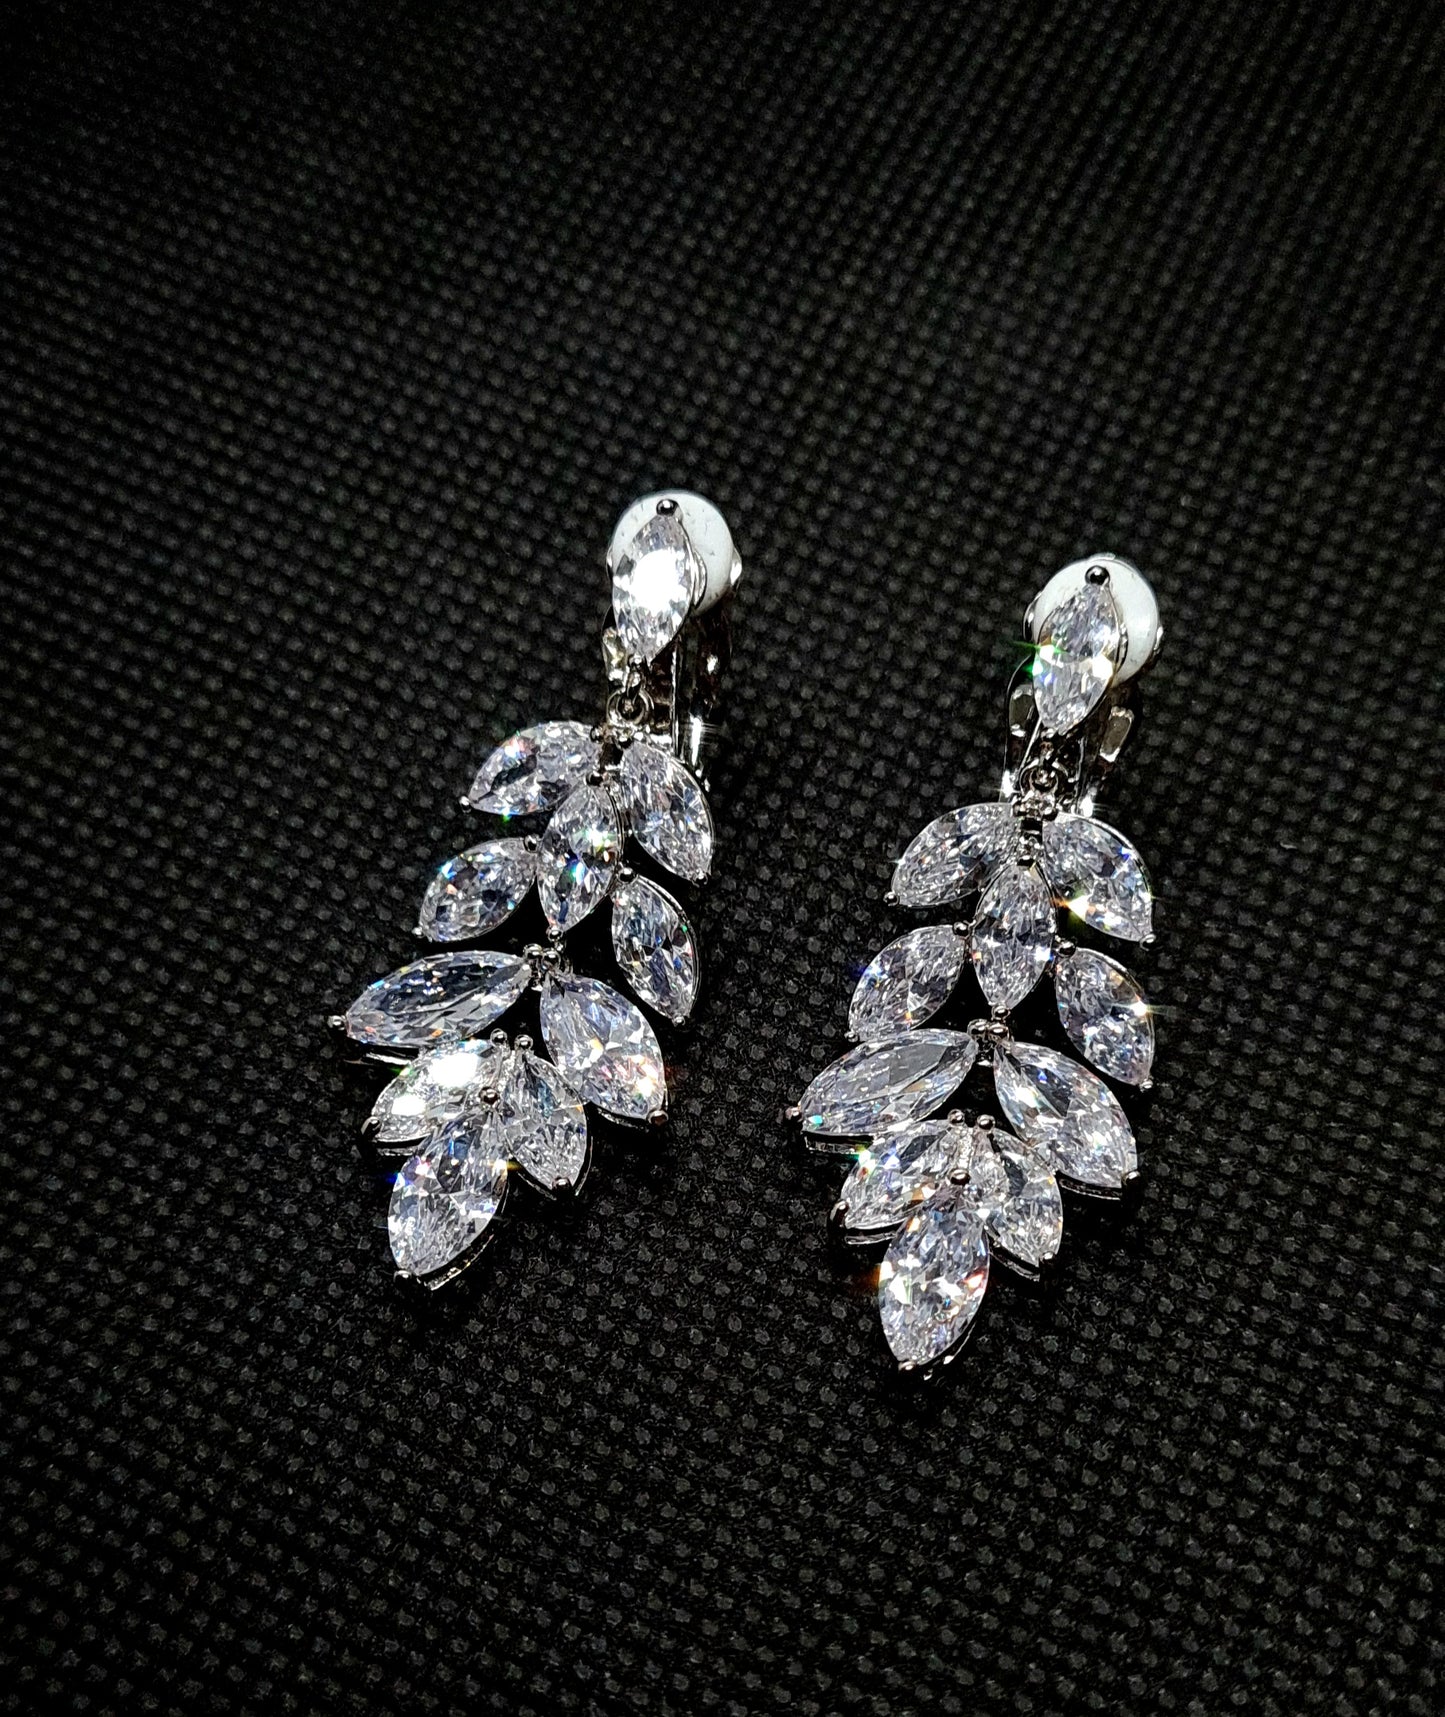 A pair of silver earrings with cubic zirconia. The earrings are simple in design and the cubic zirconia are sparkling. The earrings are a perfect accessory for a special occasion or a gift for a loved one.